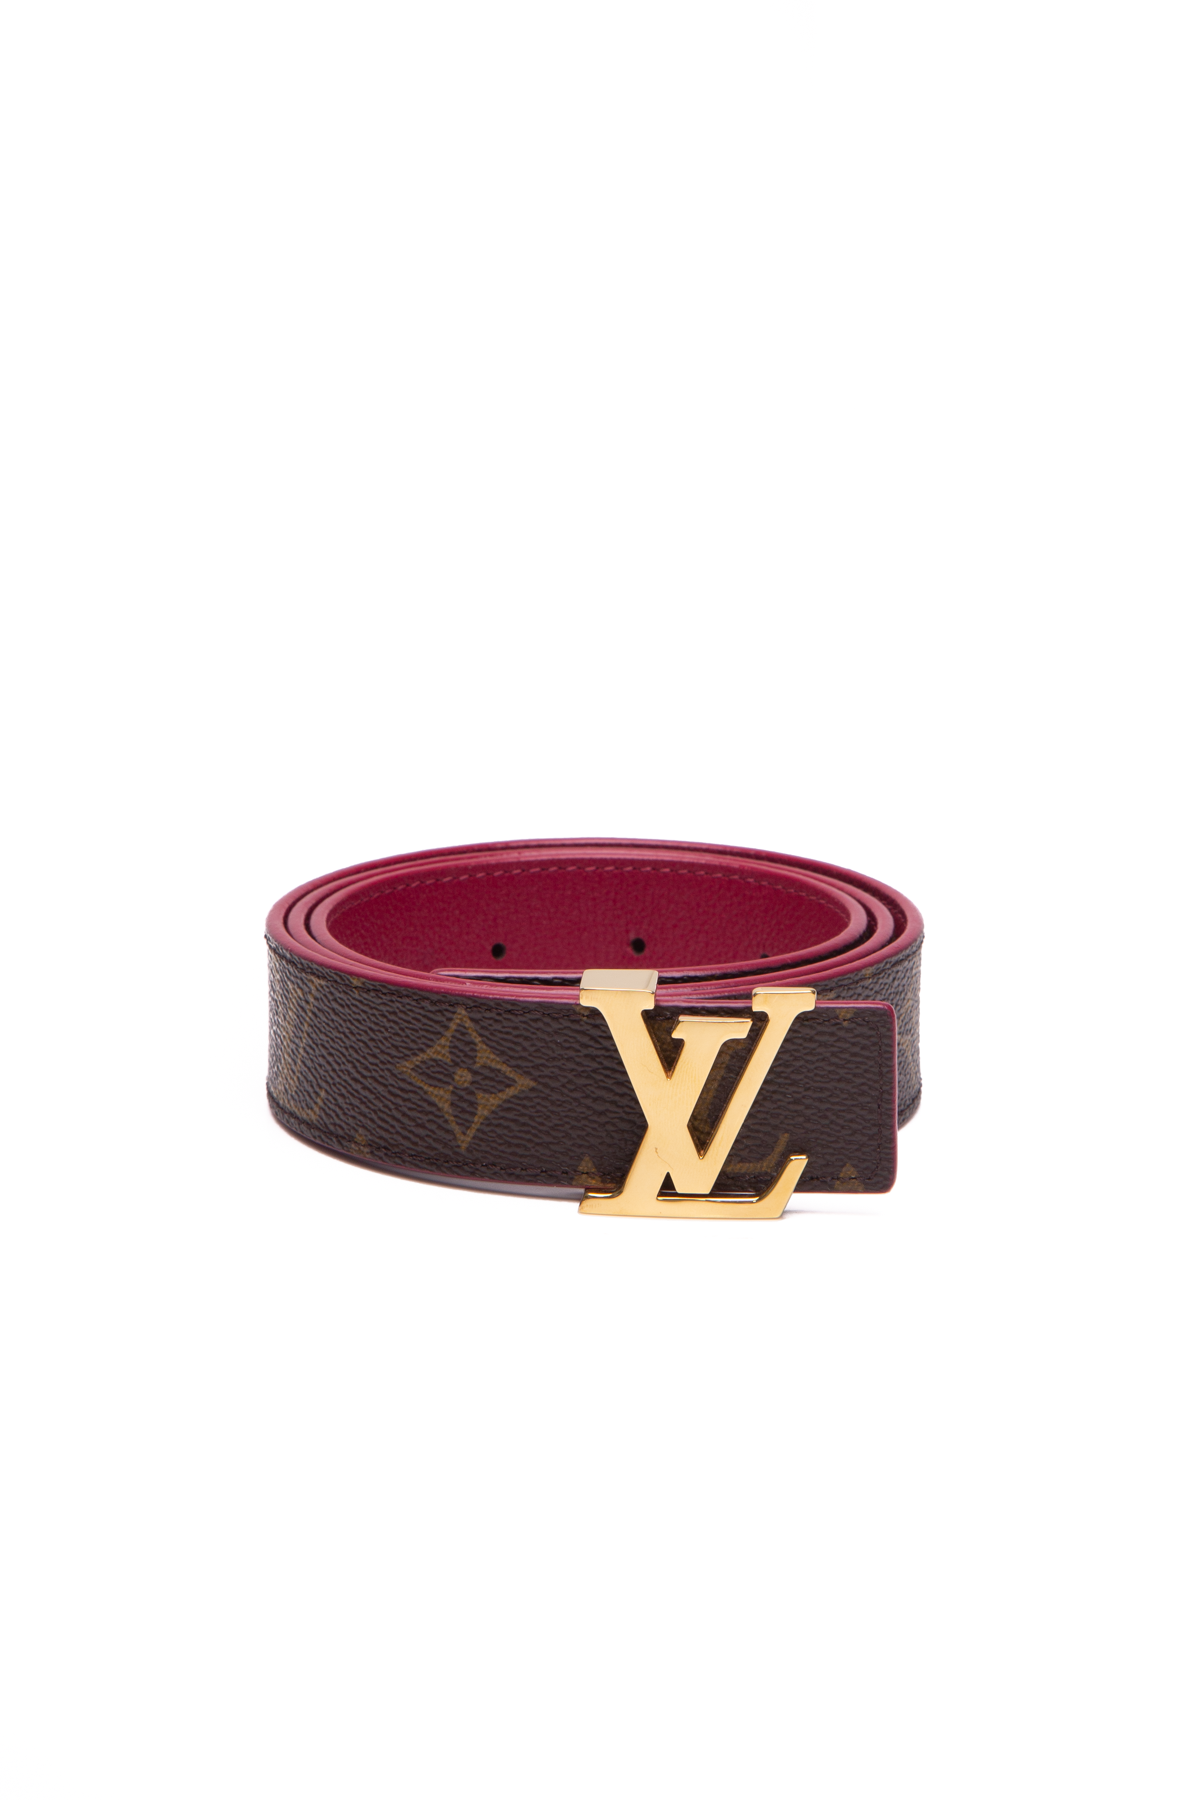 Louis Vuitton, Accessories, Authentic Lv Reversible Belt Like New And  Comes With Original Packaging